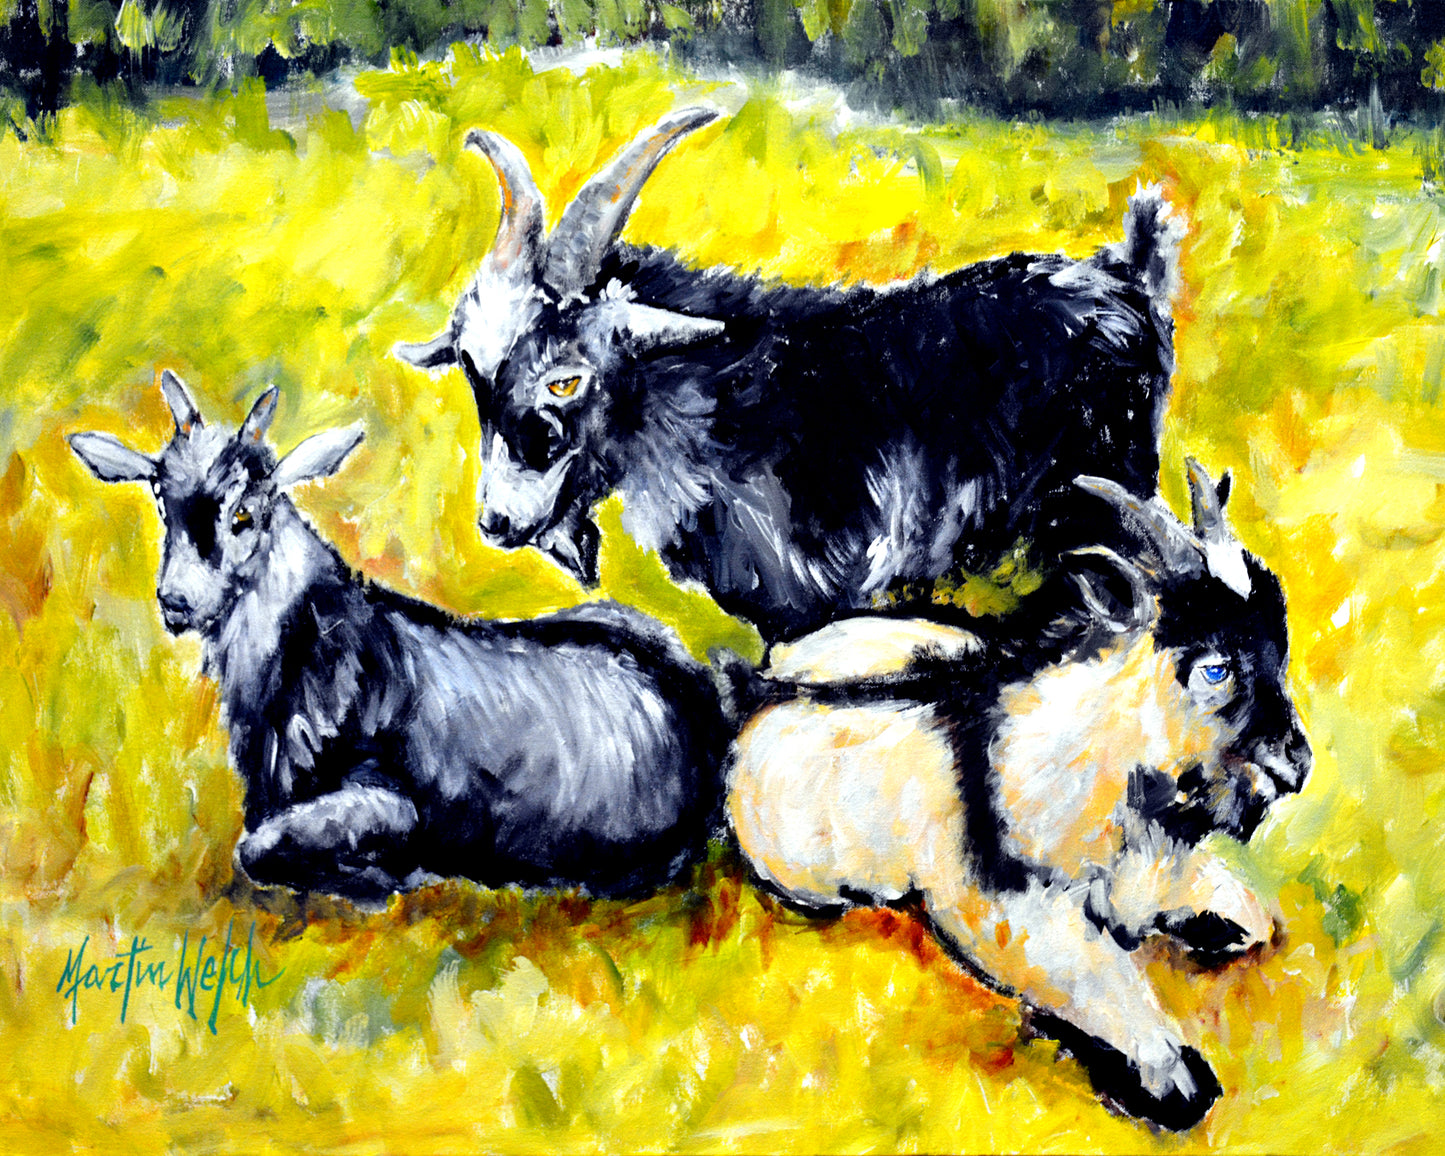 Scooter, Pooter, Tooter - Goats - 11"x14" Print